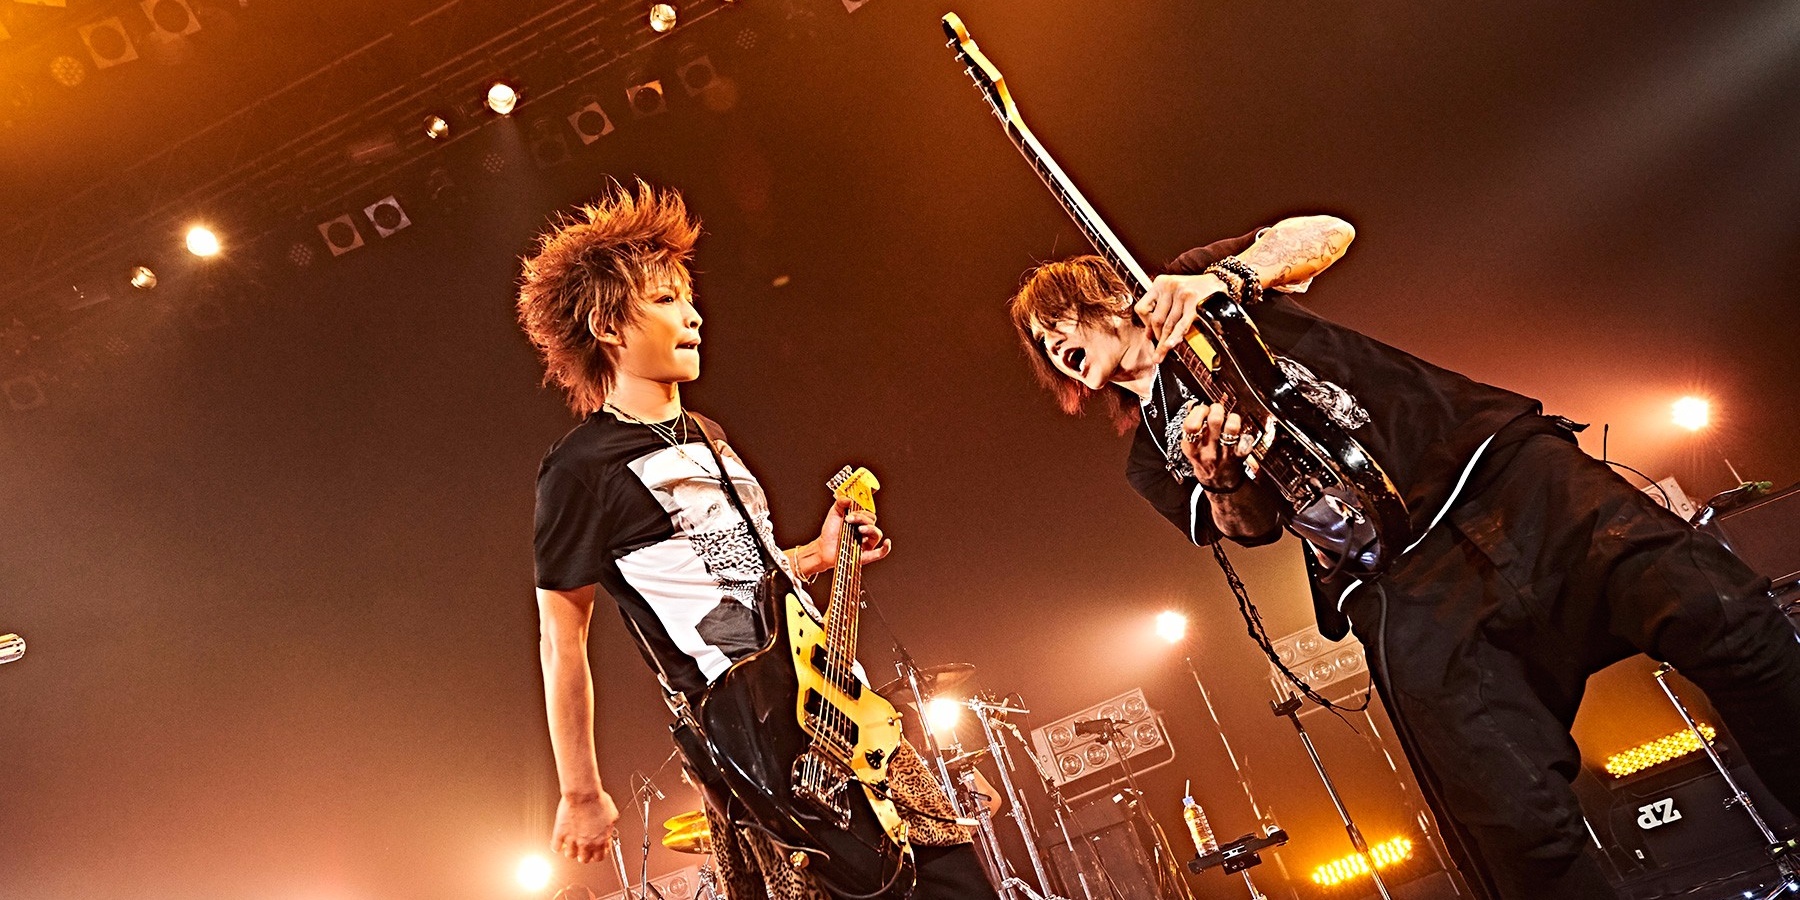 Sugizo Takes On Inoran As Luna Sea S Guitar Gods Engage In A Battle Of